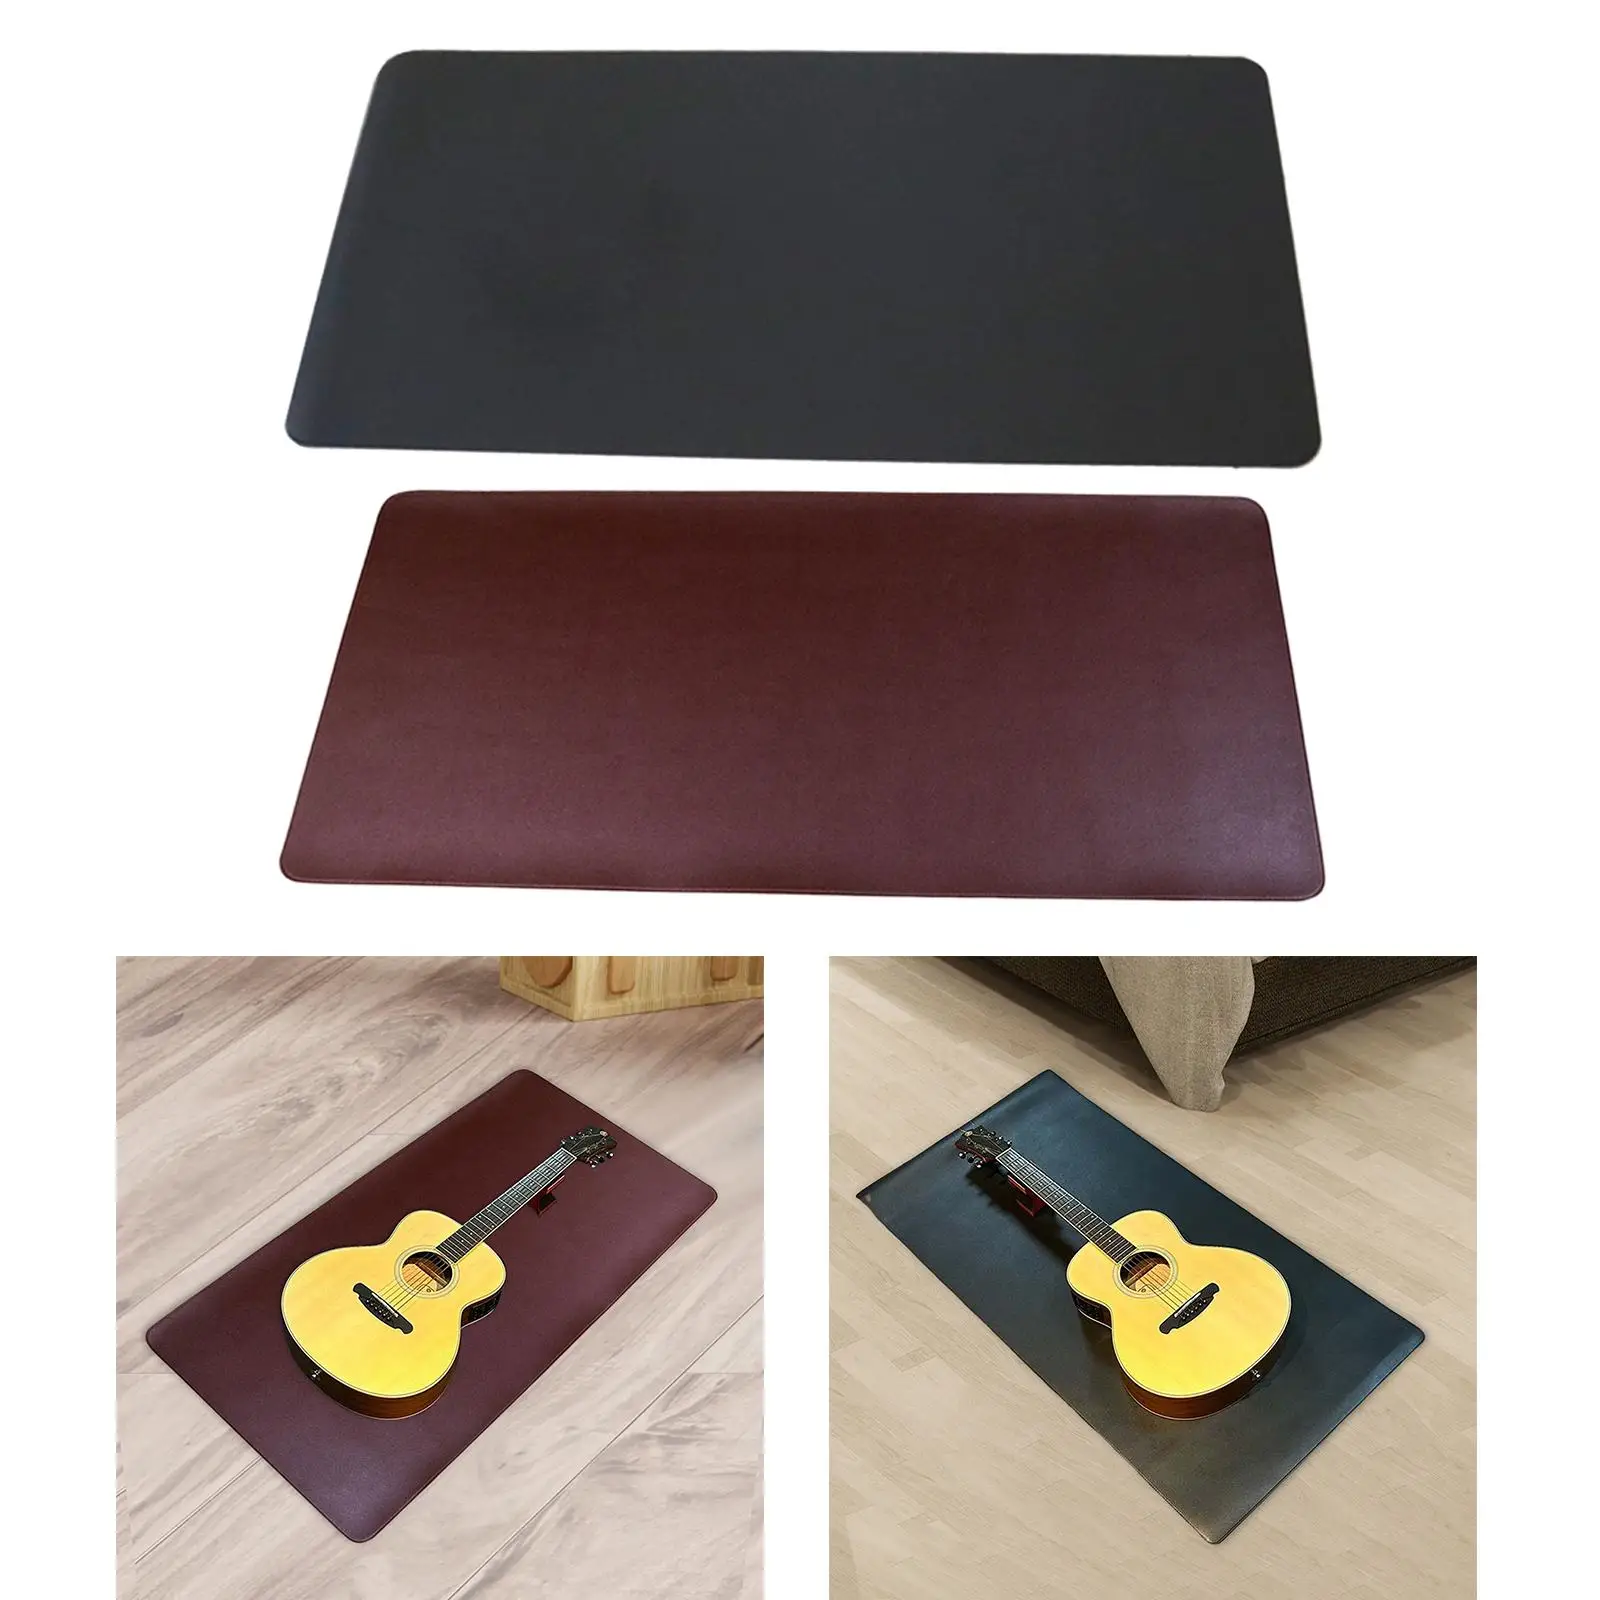 Guitar Work Mat Anti Slip Workstation Workbench Pad for Mandolin Bass Electric Guitar Cleaning Care Tool